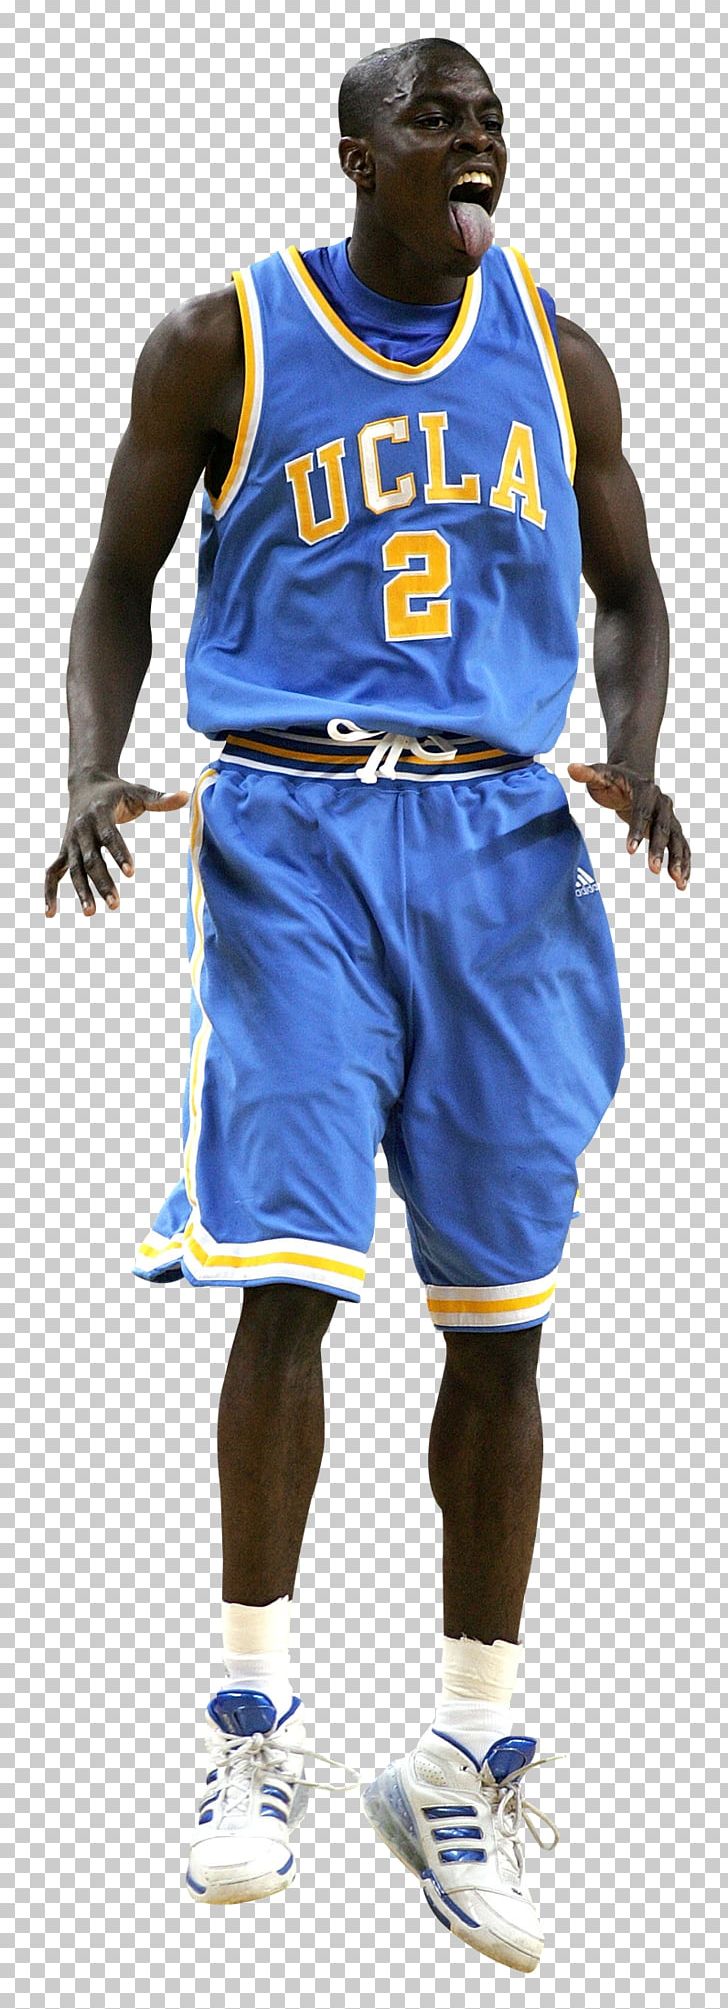 Basketball Player Sport Shorts Uniform PNG, Clipart, Ball, Basketball, Basketball Player, Blue, Clothing Free PNG Download